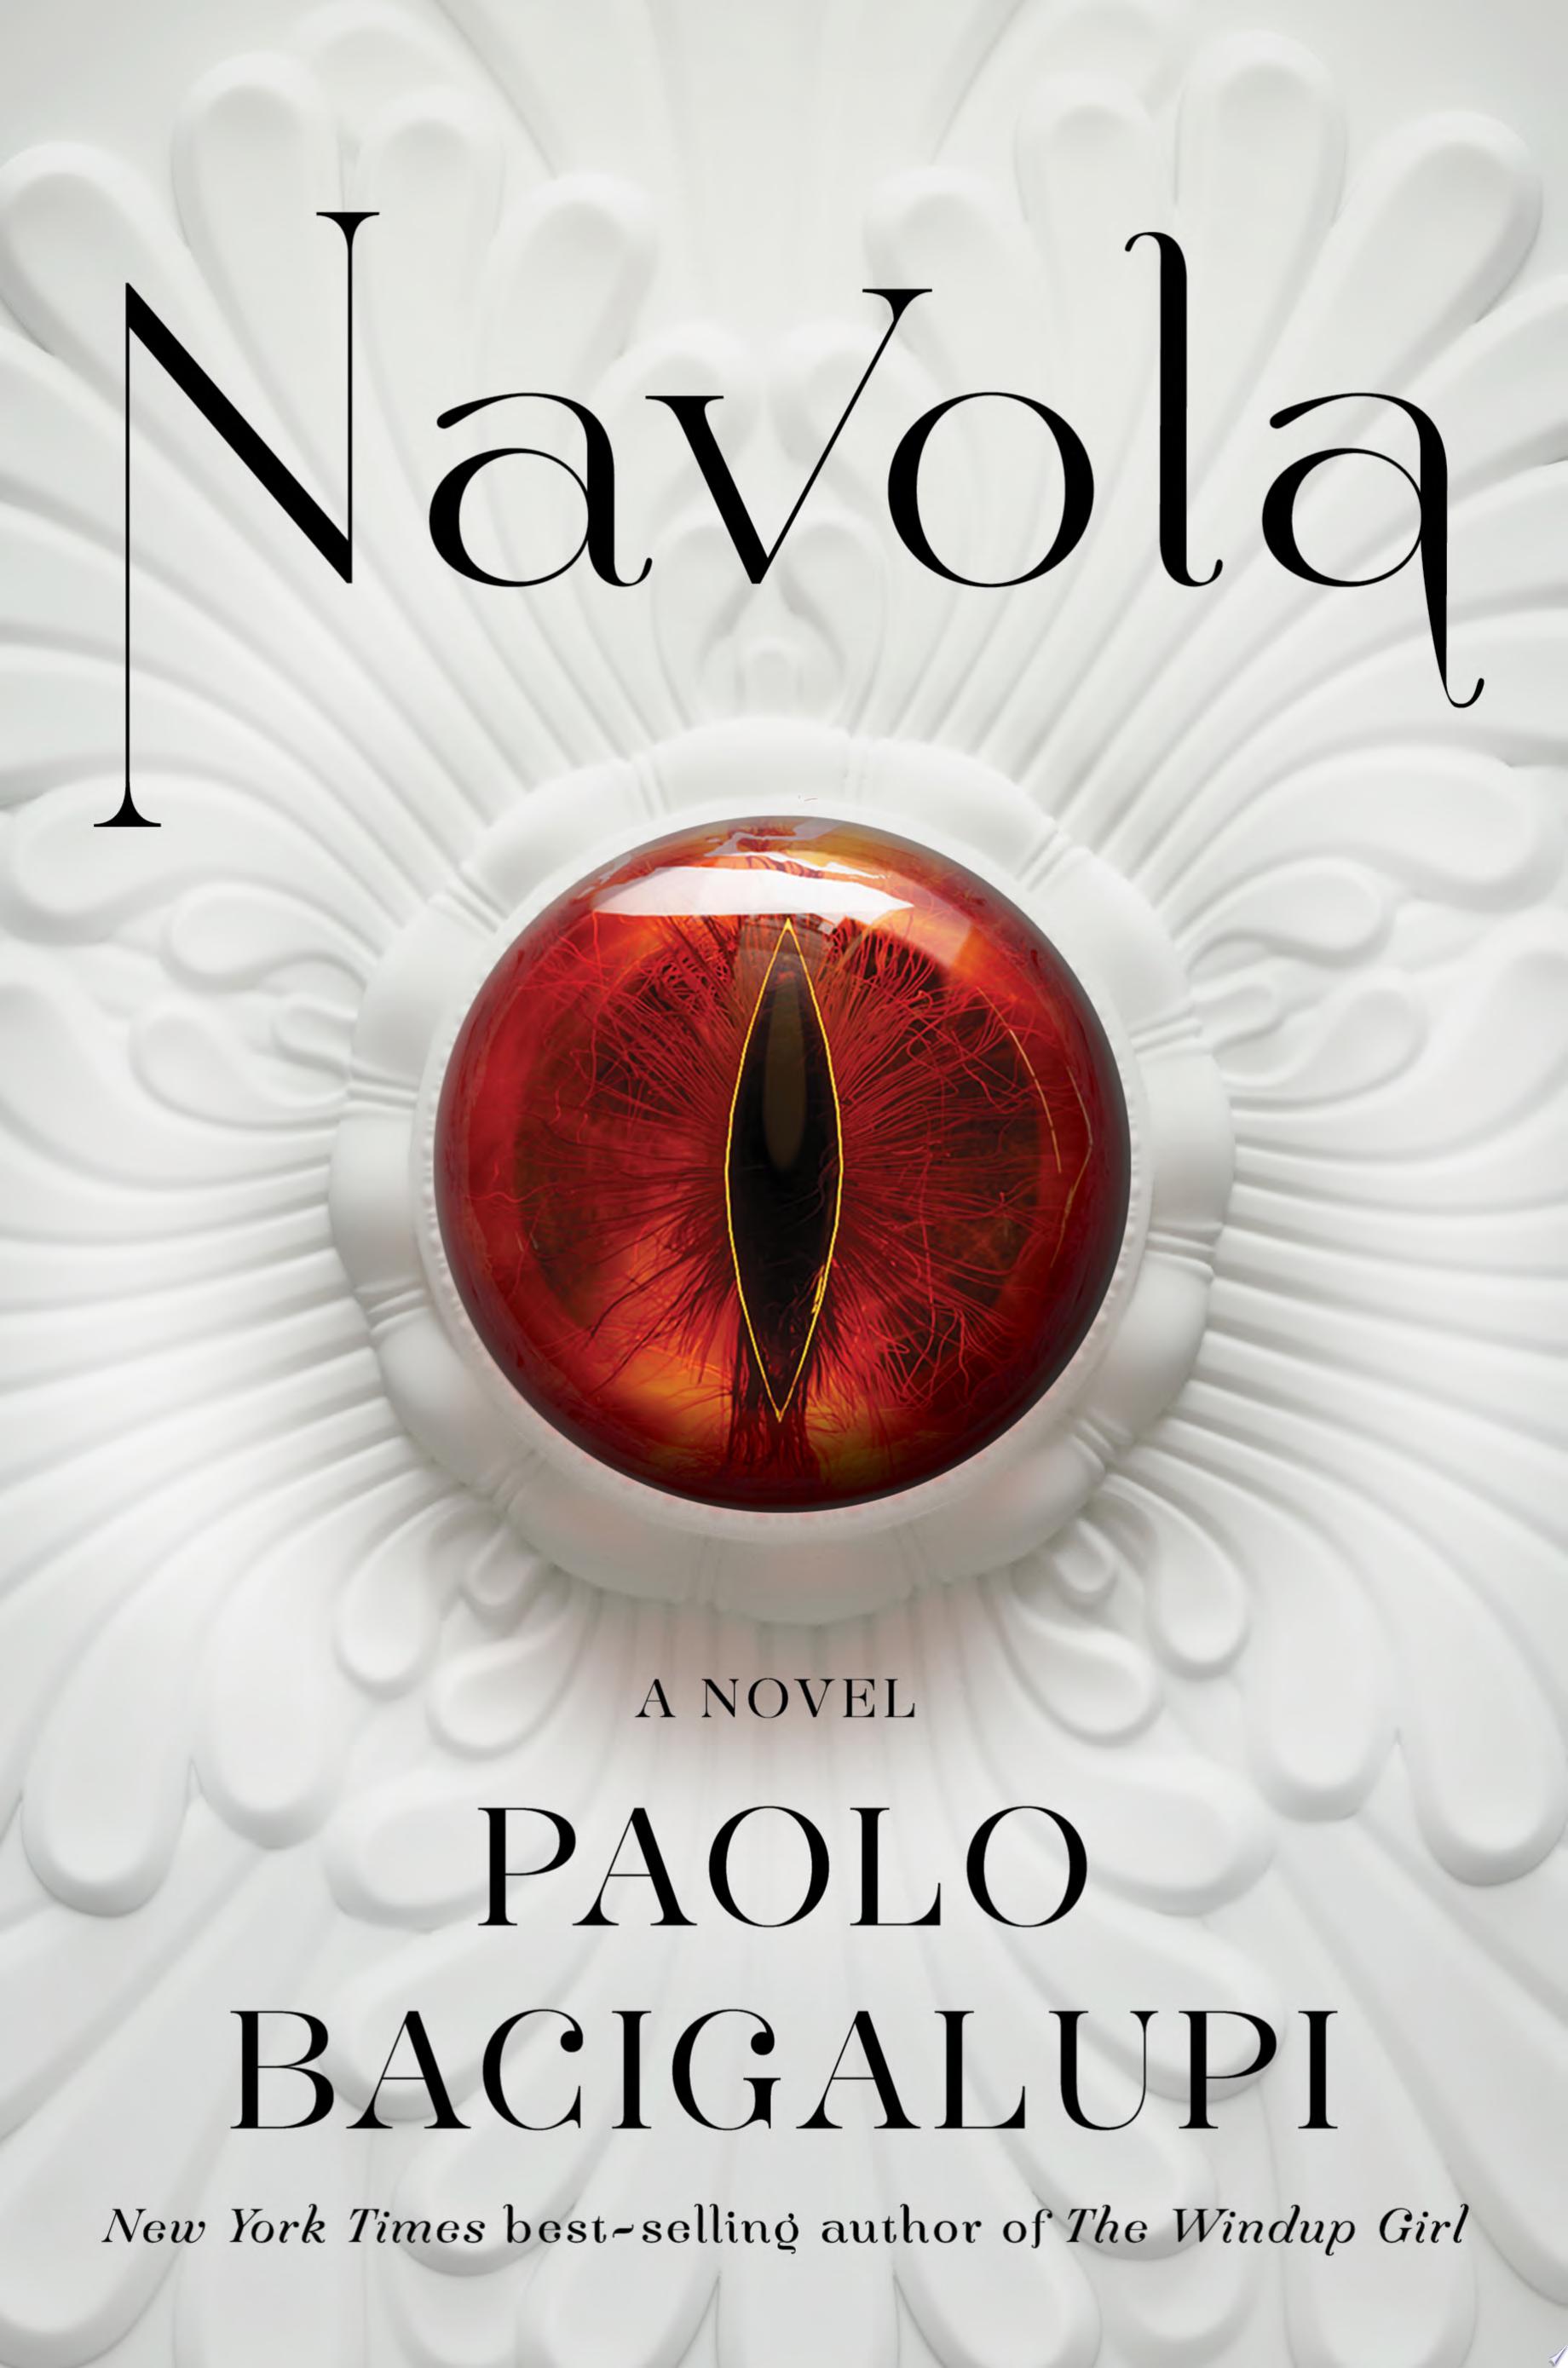 Image for "Navola" by Paolo Bacigalupi